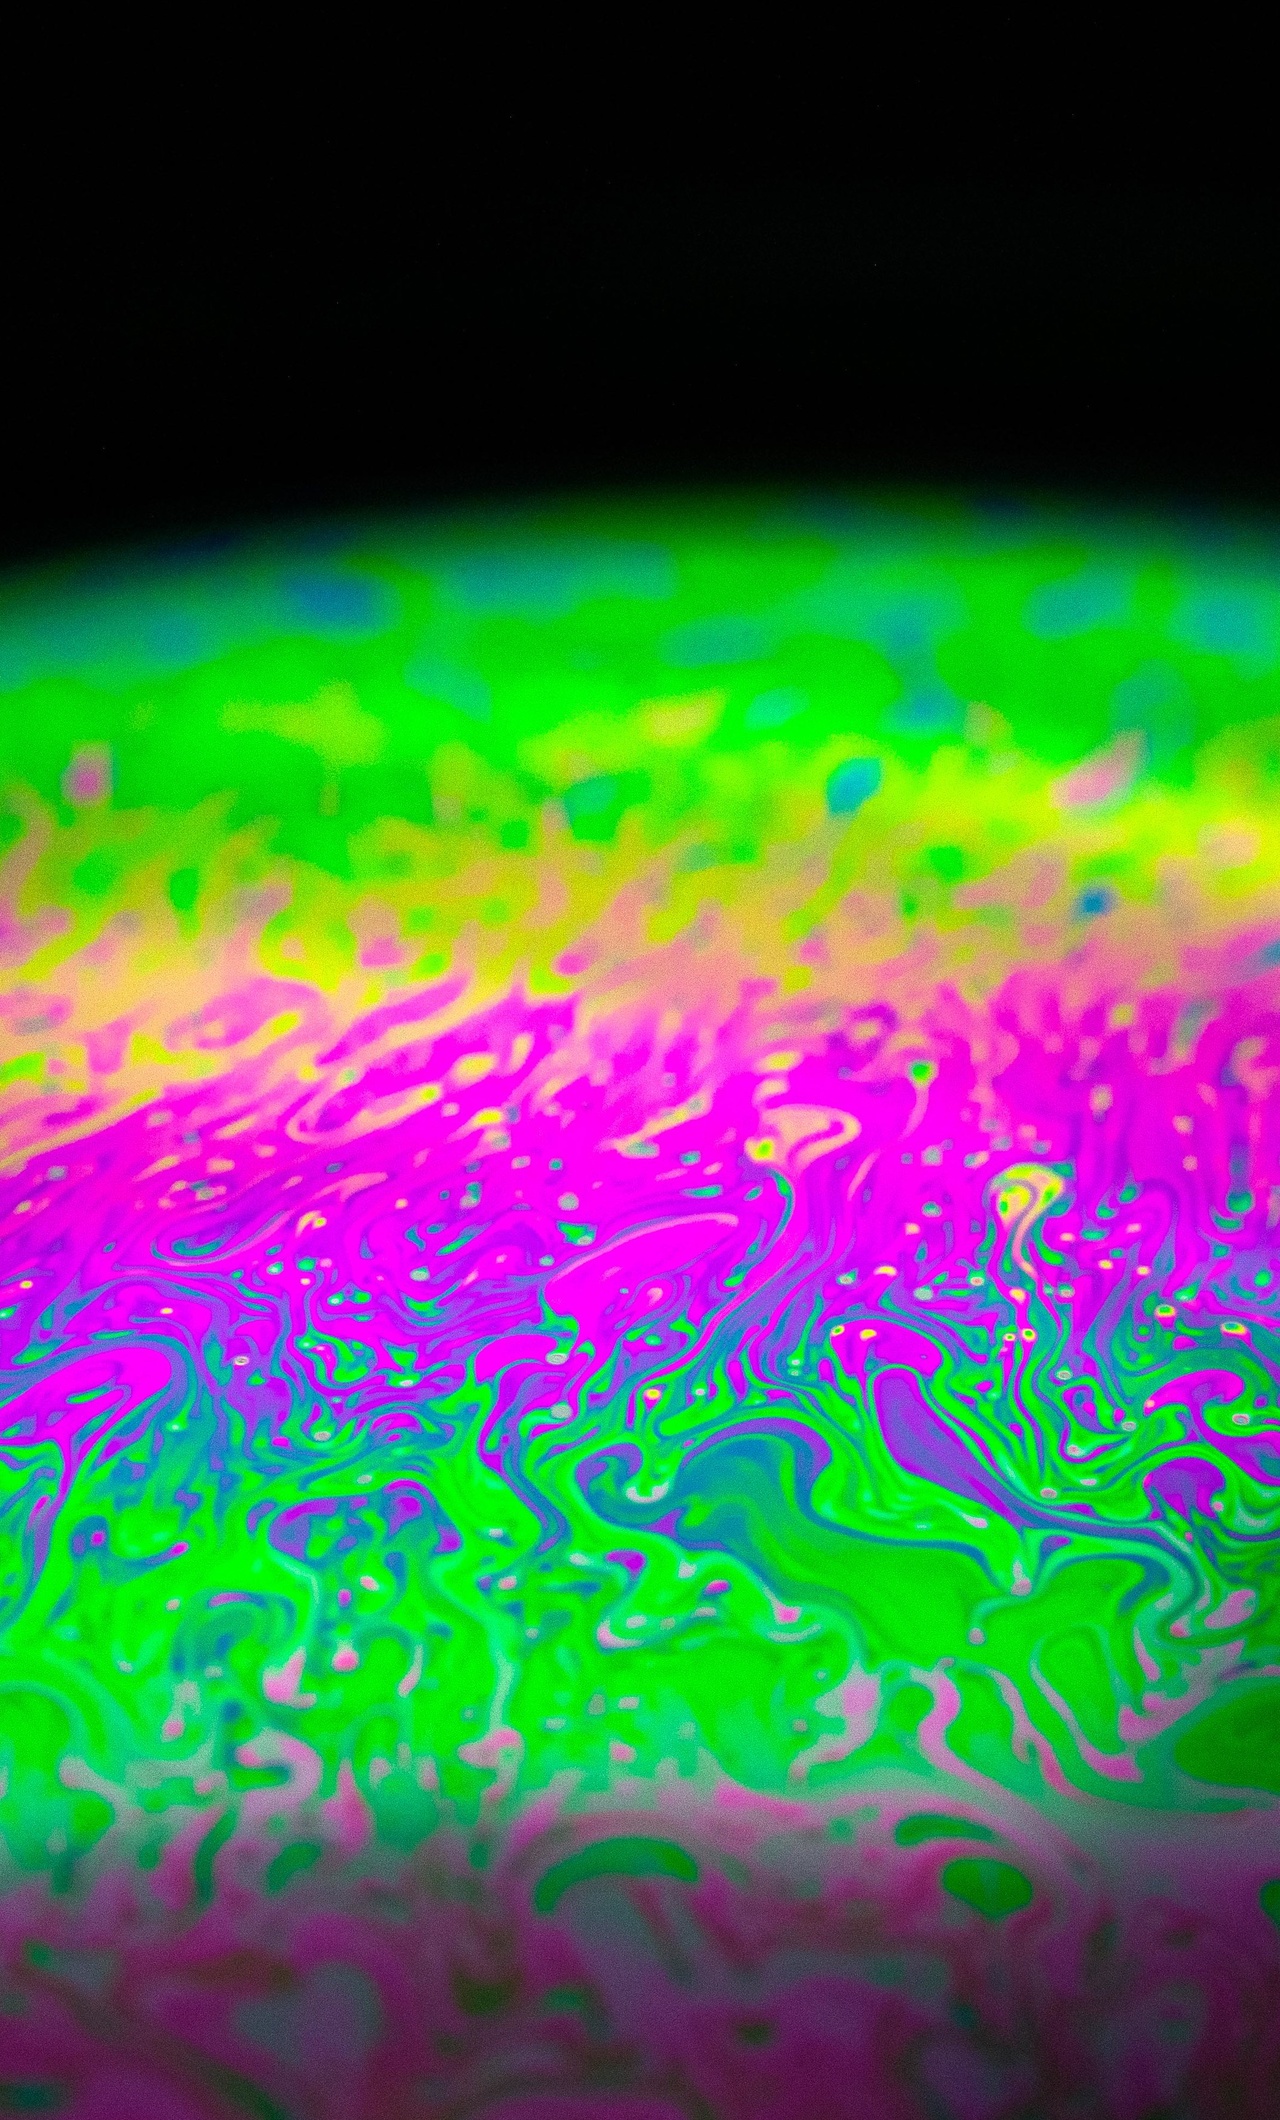 A close up of some colorful paint - Bubbles